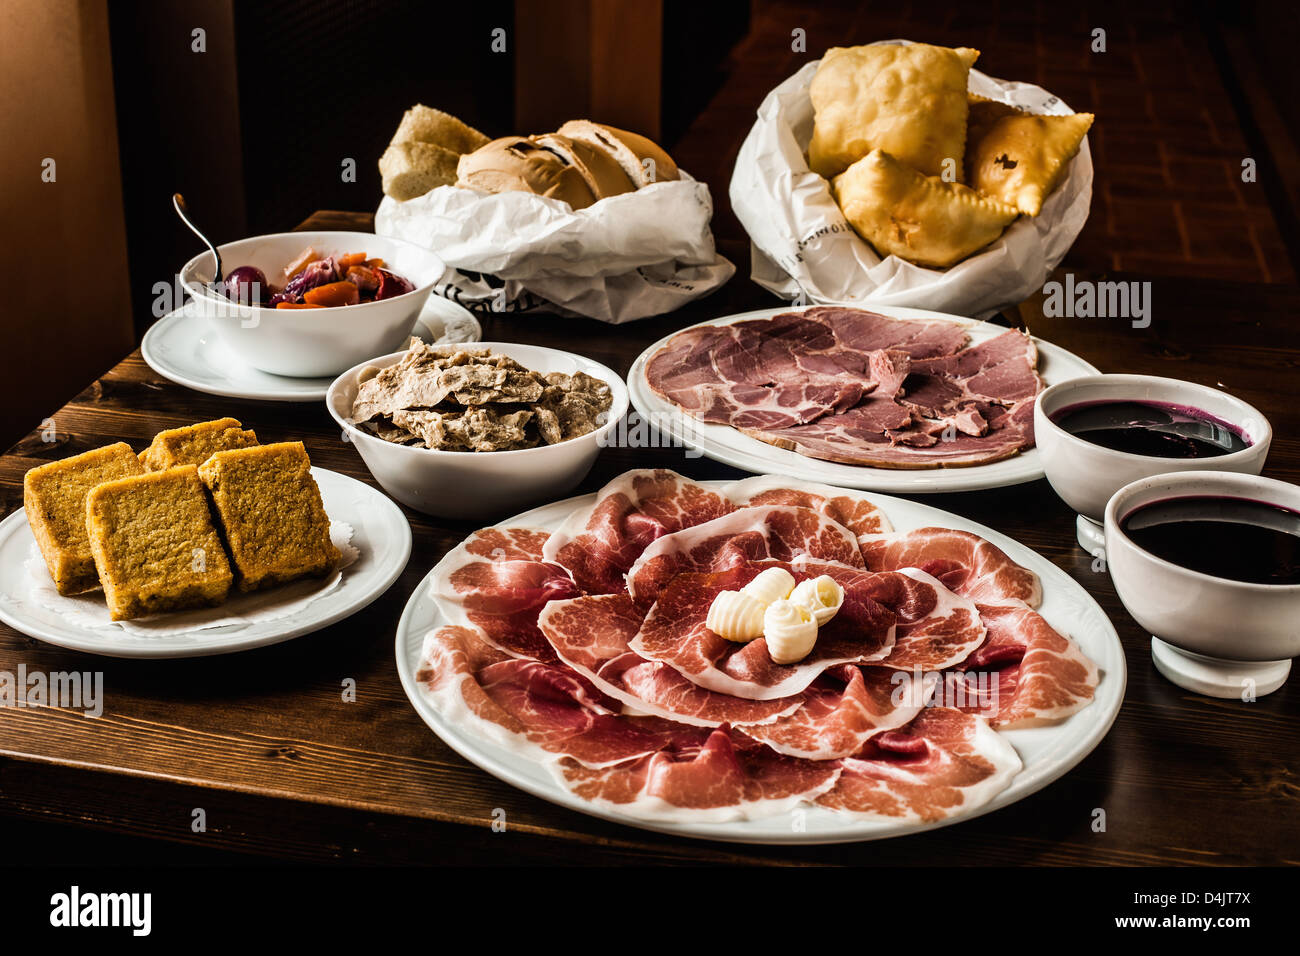 Meat, bread and fruit on table Stock Photo